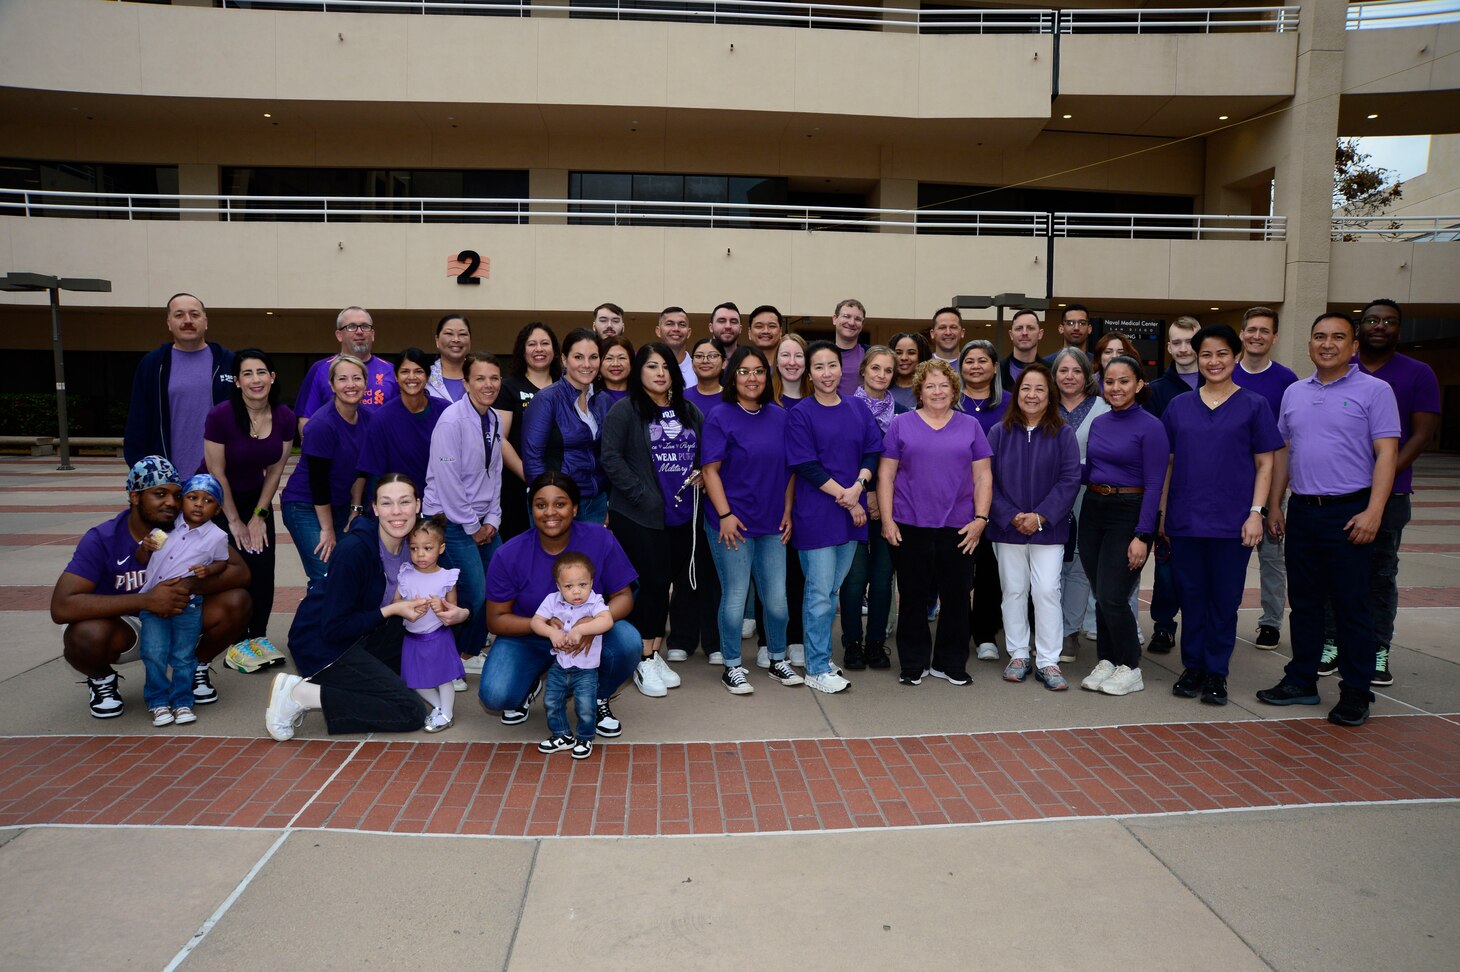 The Pediatrics department at Naval Medical Center San Diego wear purple to celebrate Month of the Military Child at hospital, April 18, 2024. NMCSD continuously seeks professional civilian talent, not just limited to health care providers and administrative support. For anyone seeking a federal job, visit USAJobs at usajobs.gov - the Federal Government's official employment site.  The mission of NMCSD is to prepare service members to deploy in support of operational forces, deliver high quality health care services, and shape the future of military medicine through education, training, and research. NMCSD employs more than 5,000 active-duty military personnel, civilians and contractors in southern California to provide patients with world-class care. Anchored in Excellence, Committed to Health! (U.S. Navy photo by Mass Communication Specialist 2nd Class Celia Martin)